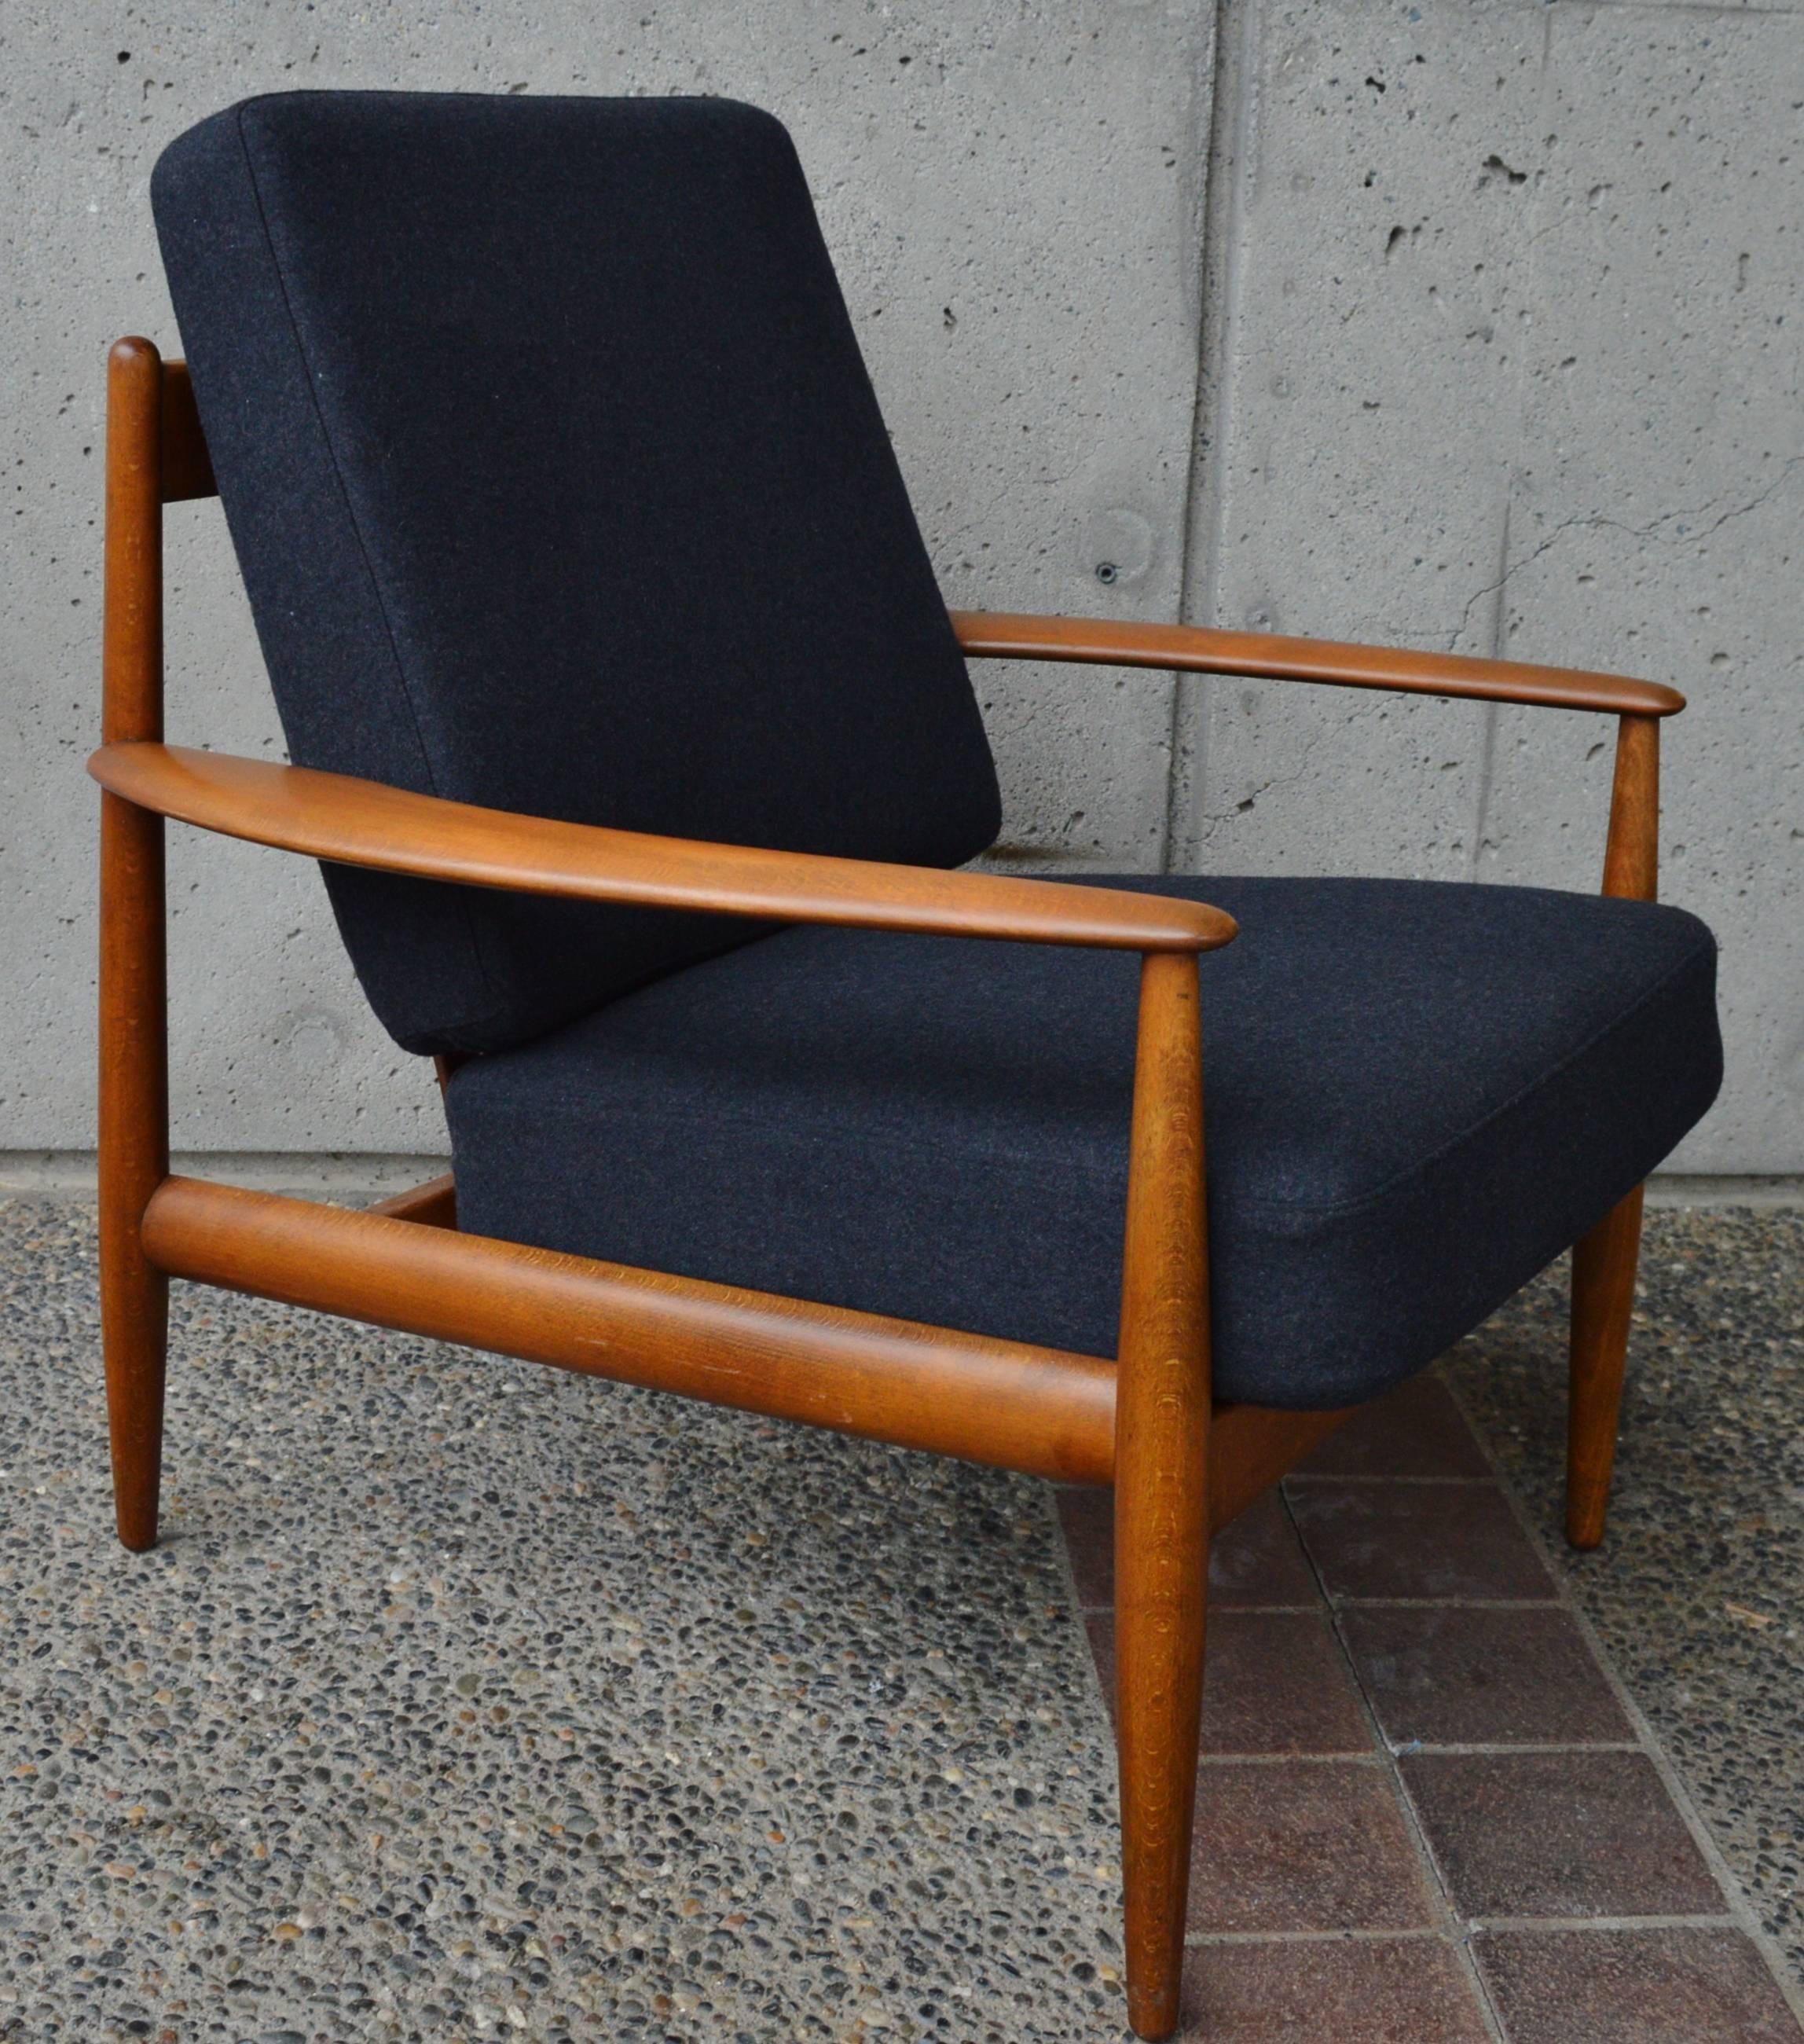 Mid-20th Century 1950s Grete Jalk Danish Lounge Chair for France & Daverkosen in Charcoal Wool